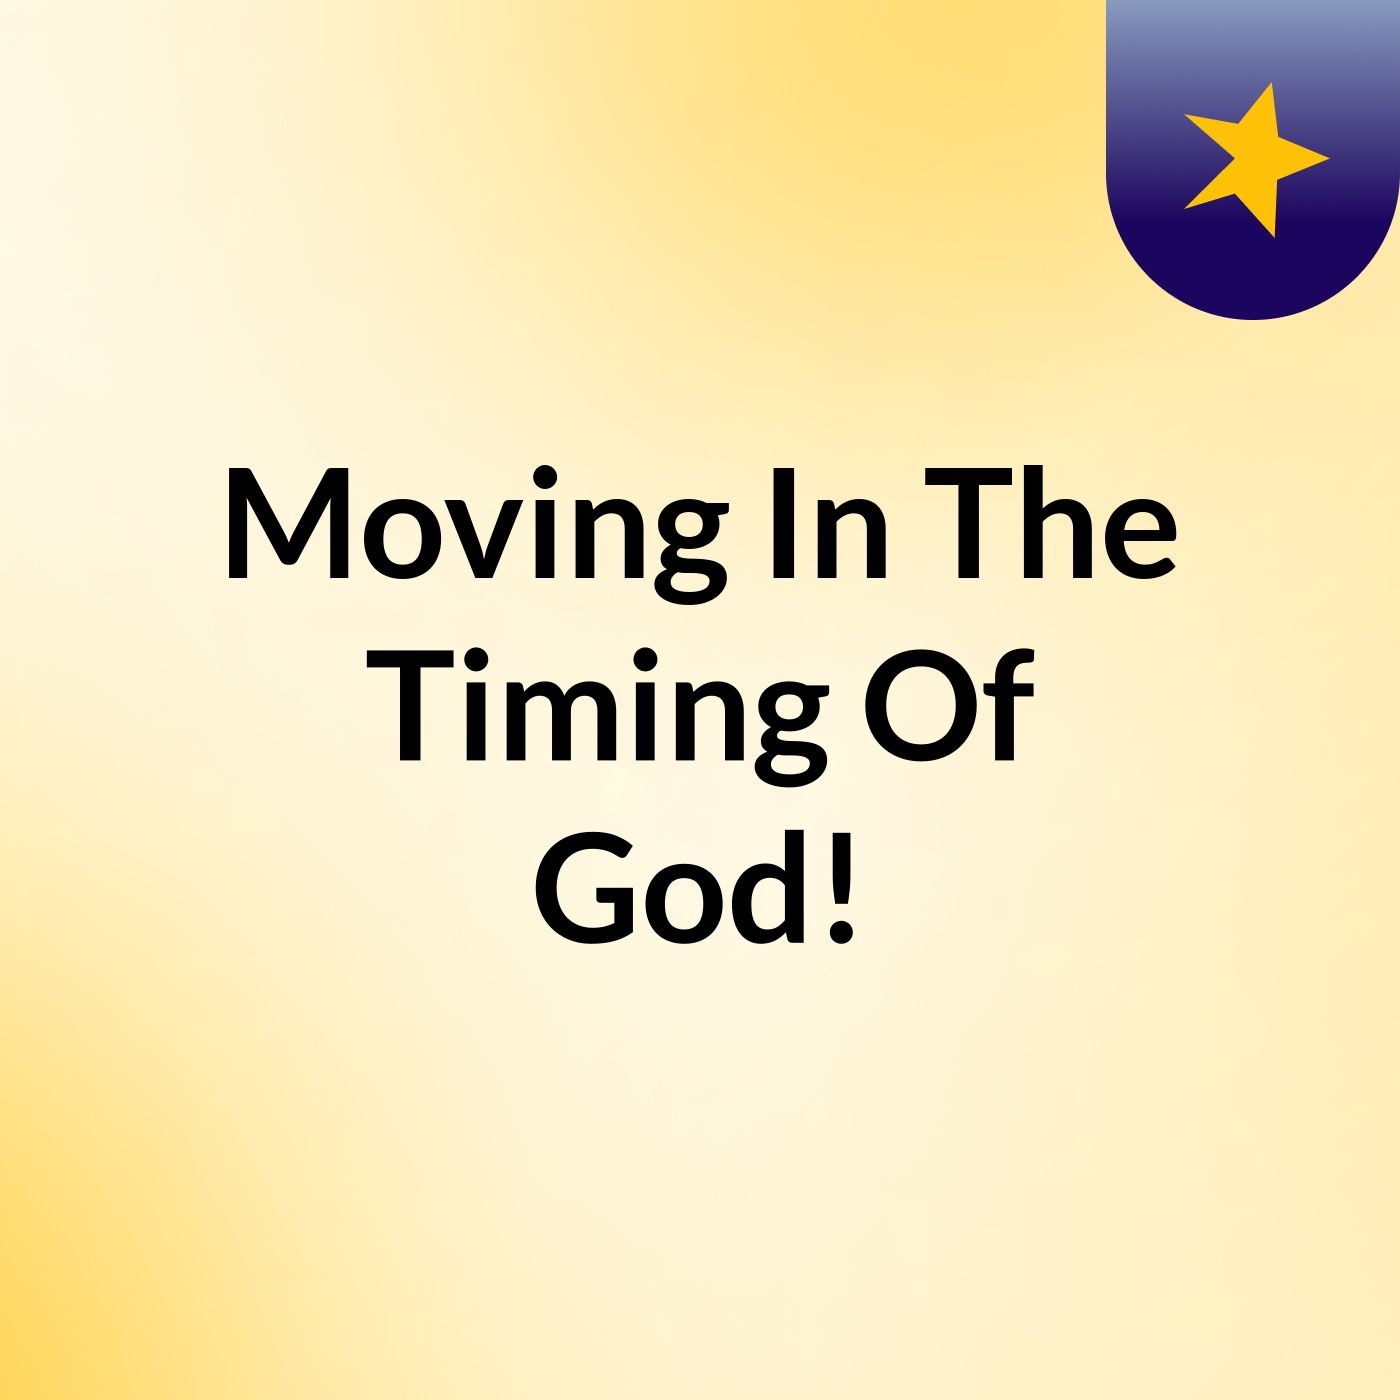 Moving In The Timing Of God!